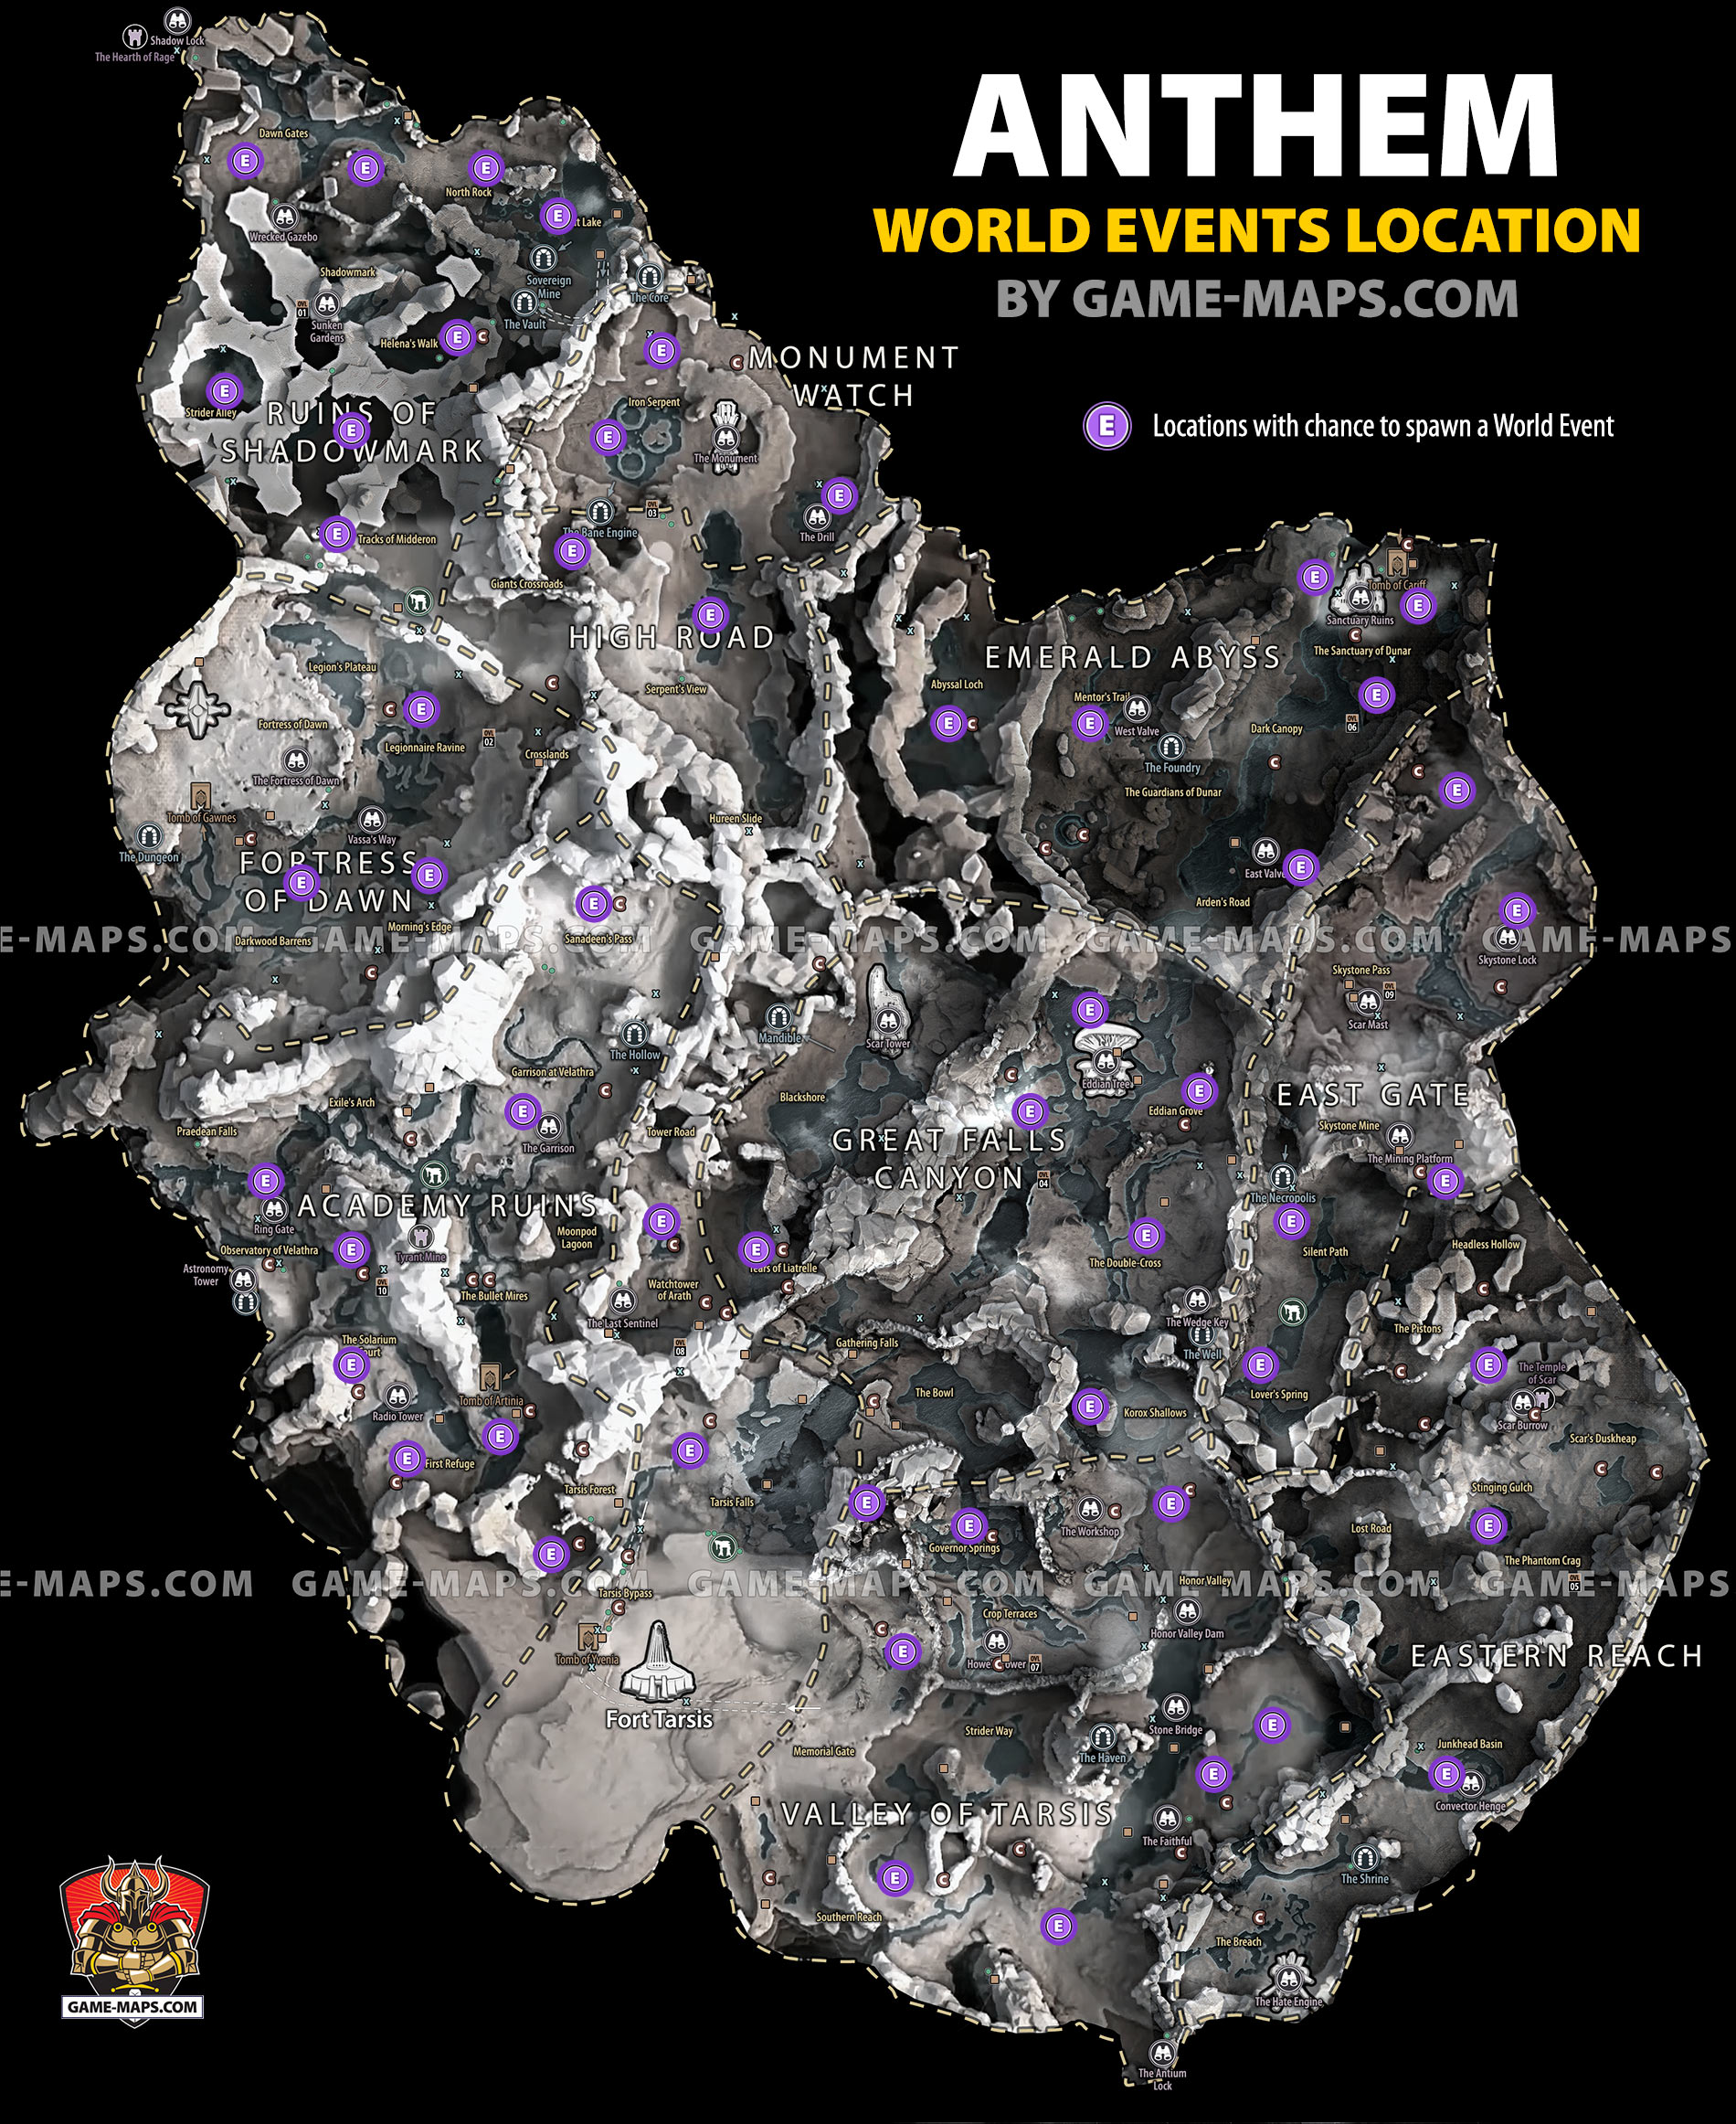 Anthem World Events Locations Map